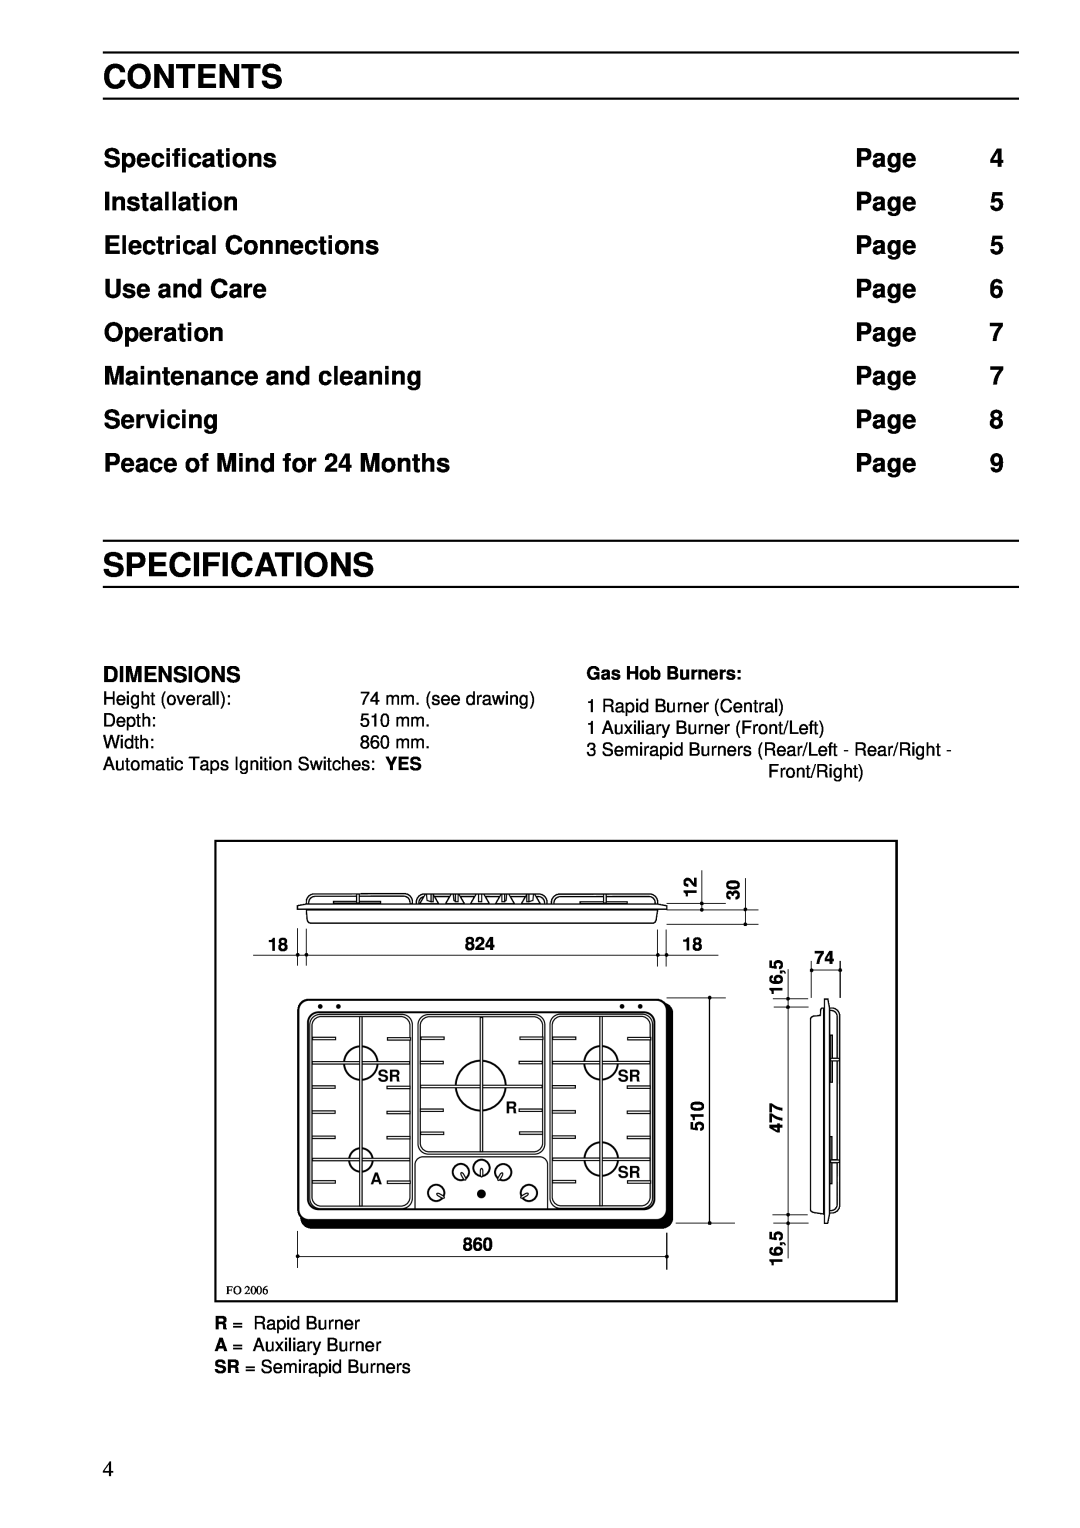 Zanussi ZBG 509 SS manual Contents, Specifications 